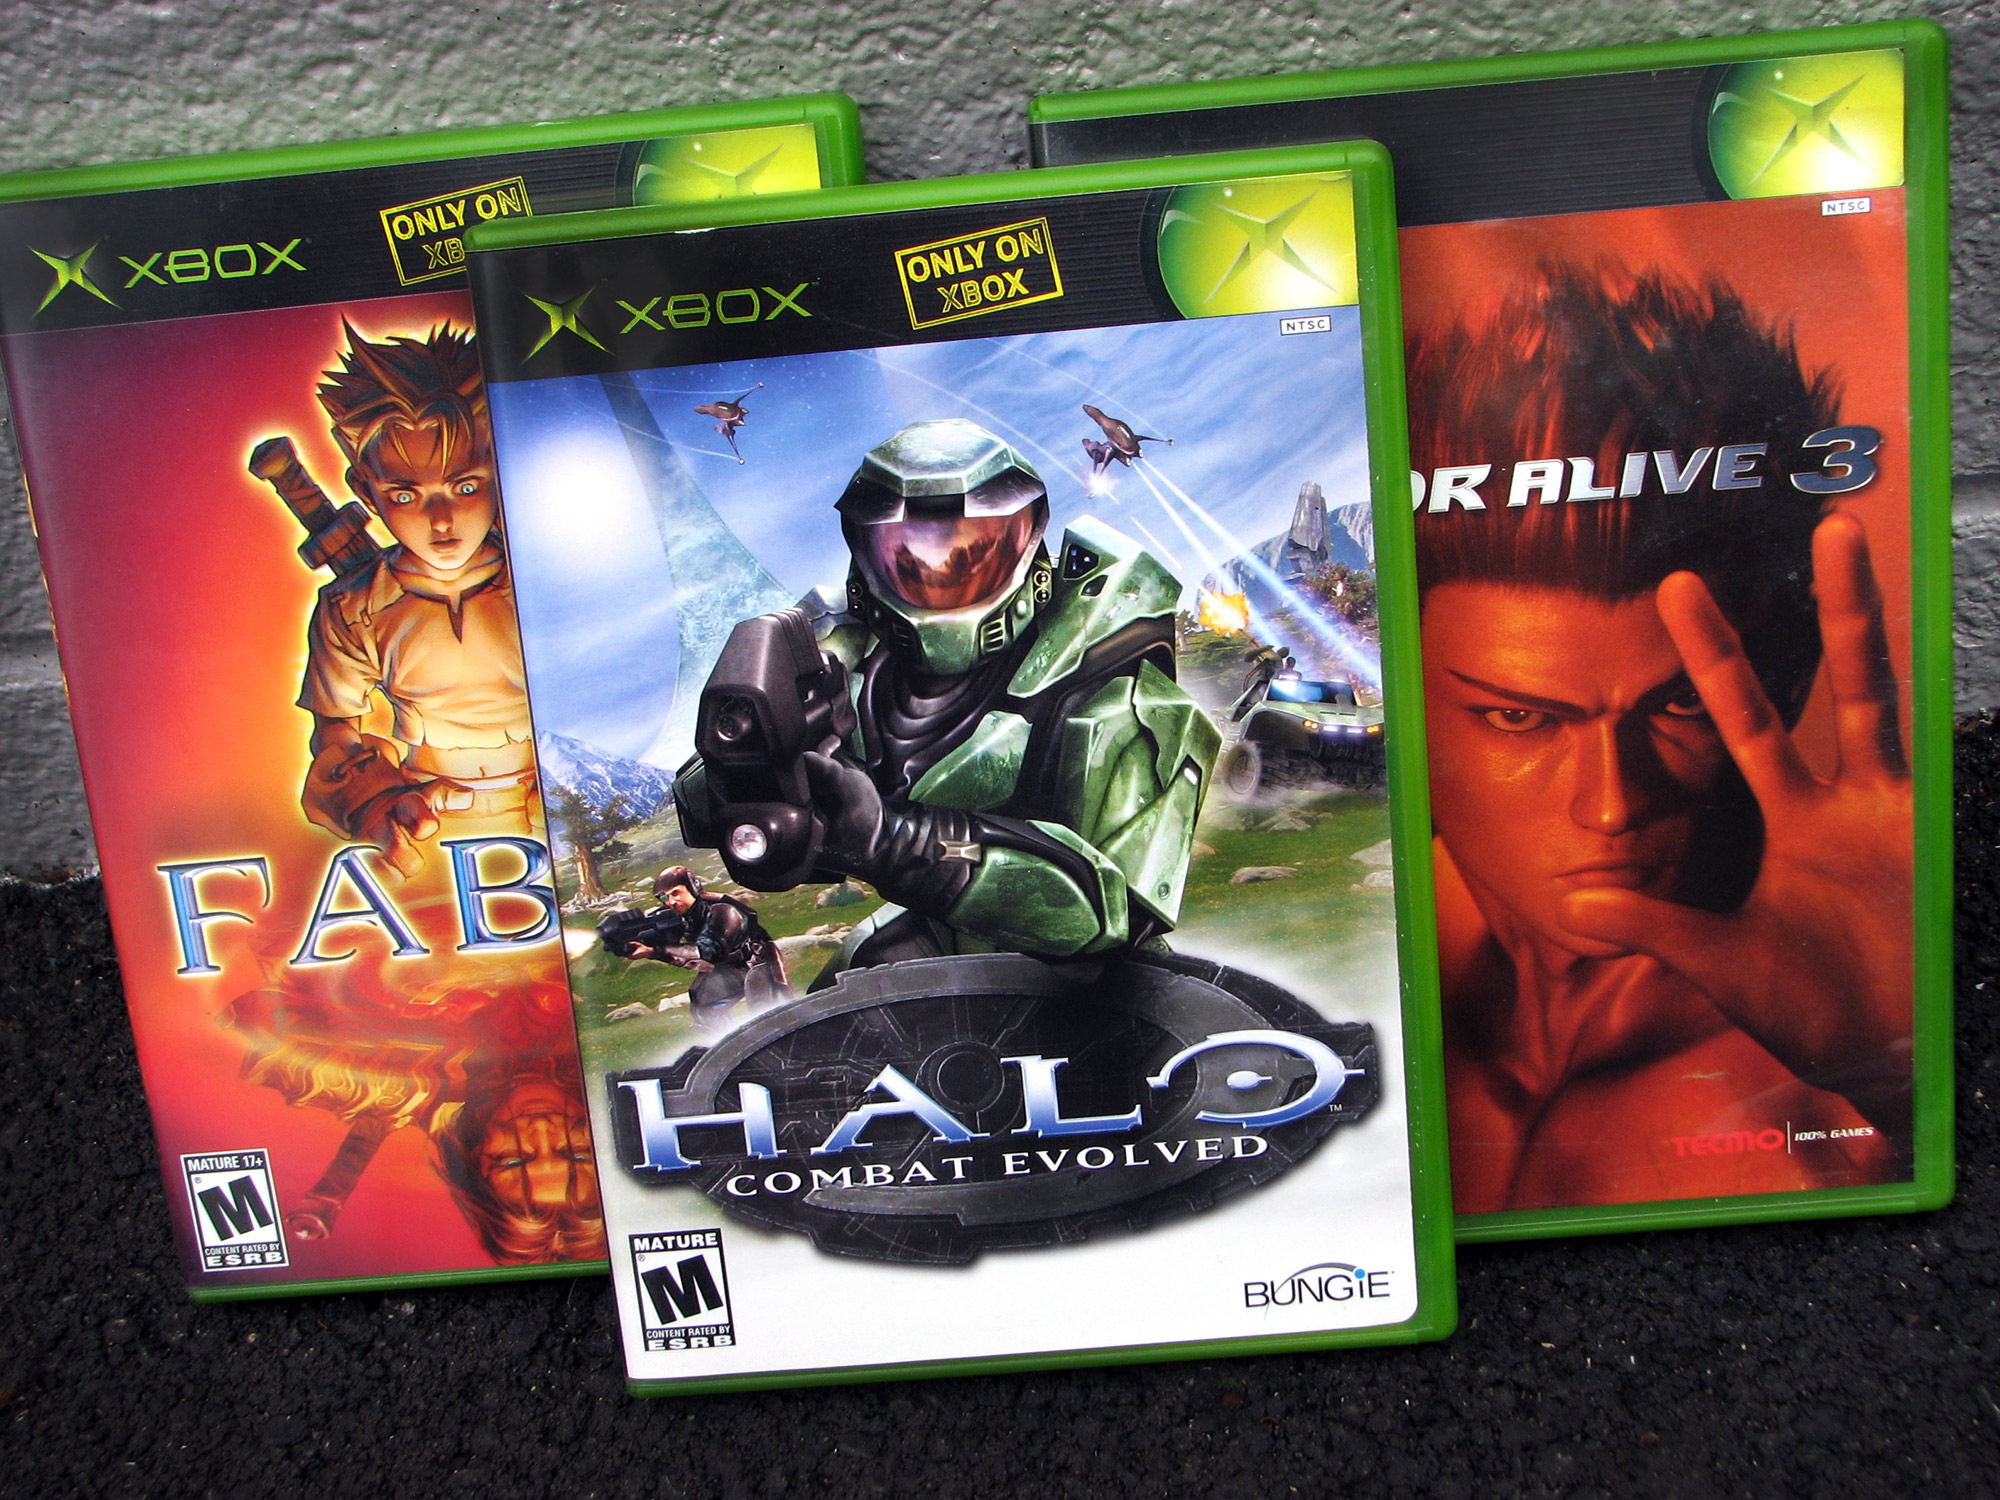 Games That Defined the Microsoft Xbox - RetroGaming with Racketboy